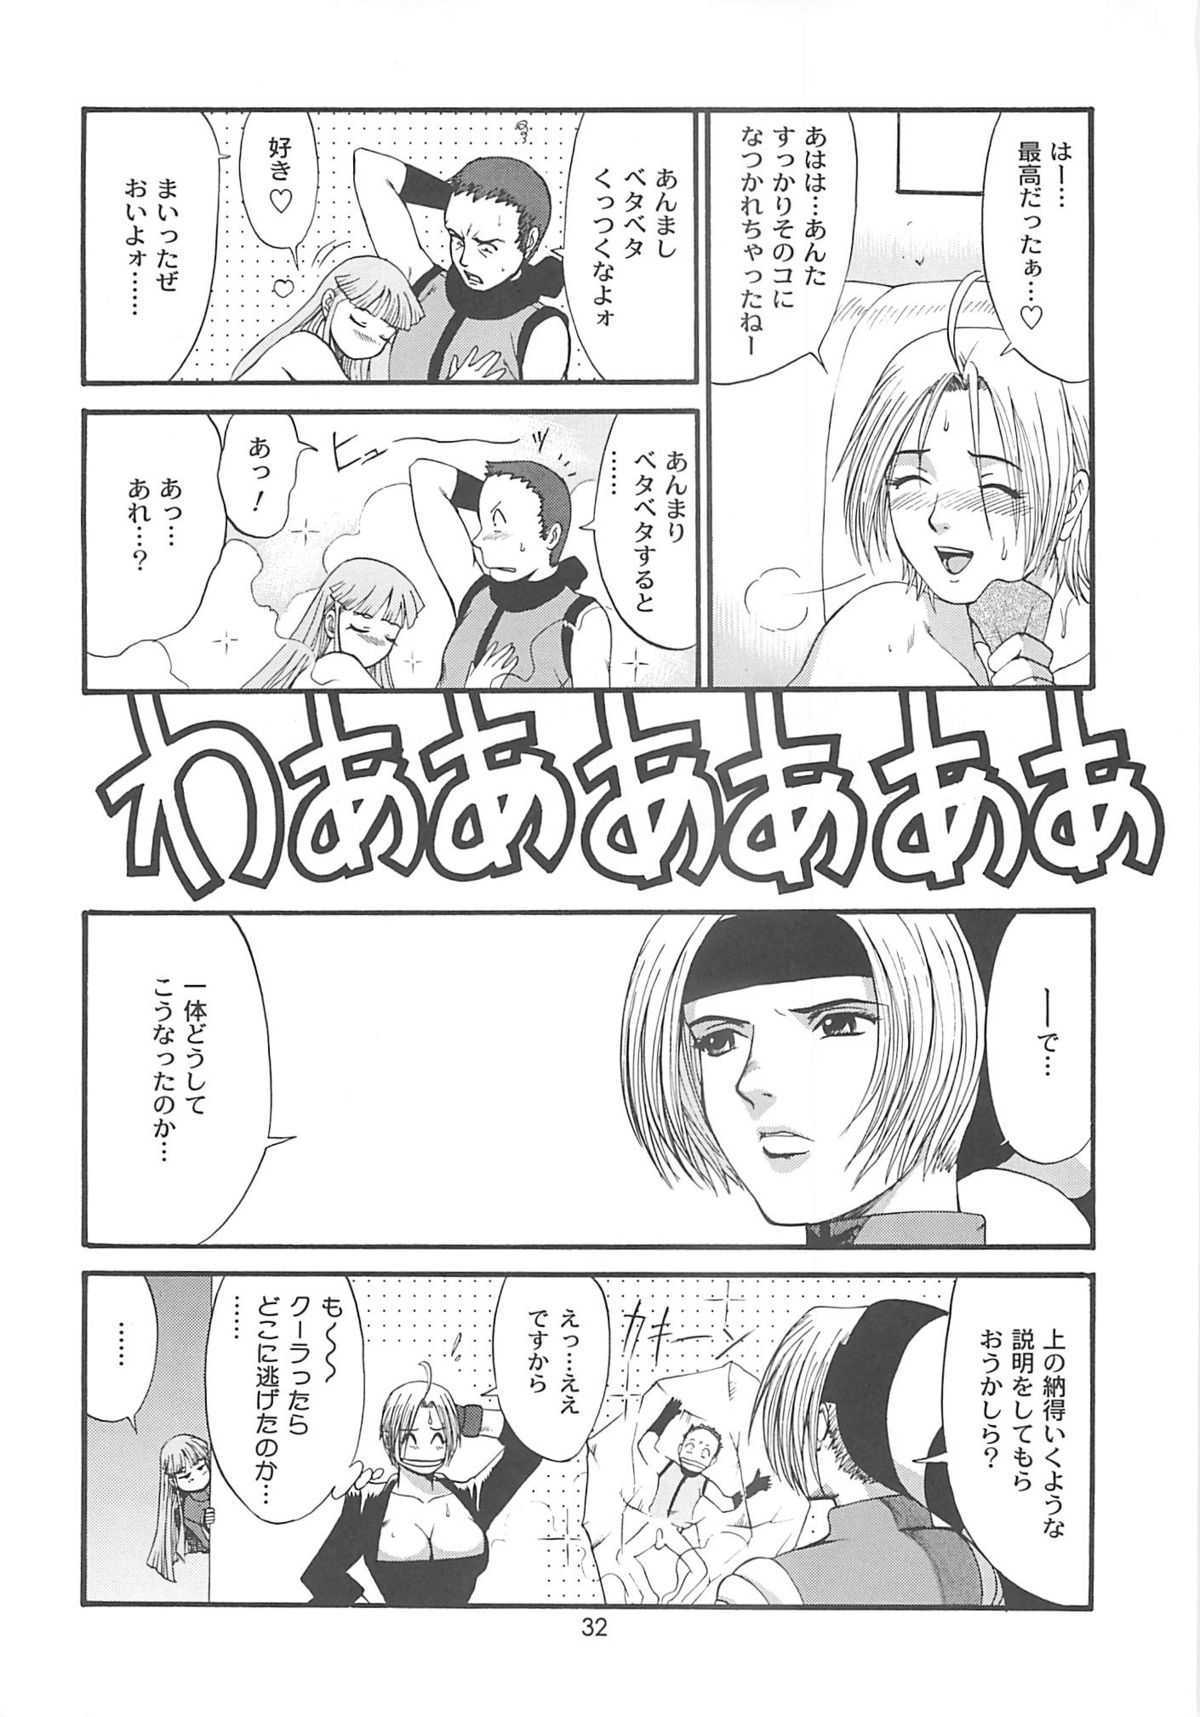 [Saigado] The Yuri &amp; Friends 2001 (King of Fighters) [彩画堂] The Yuri &amp; Friends 2001 (キング･オブ･ファイターズ)